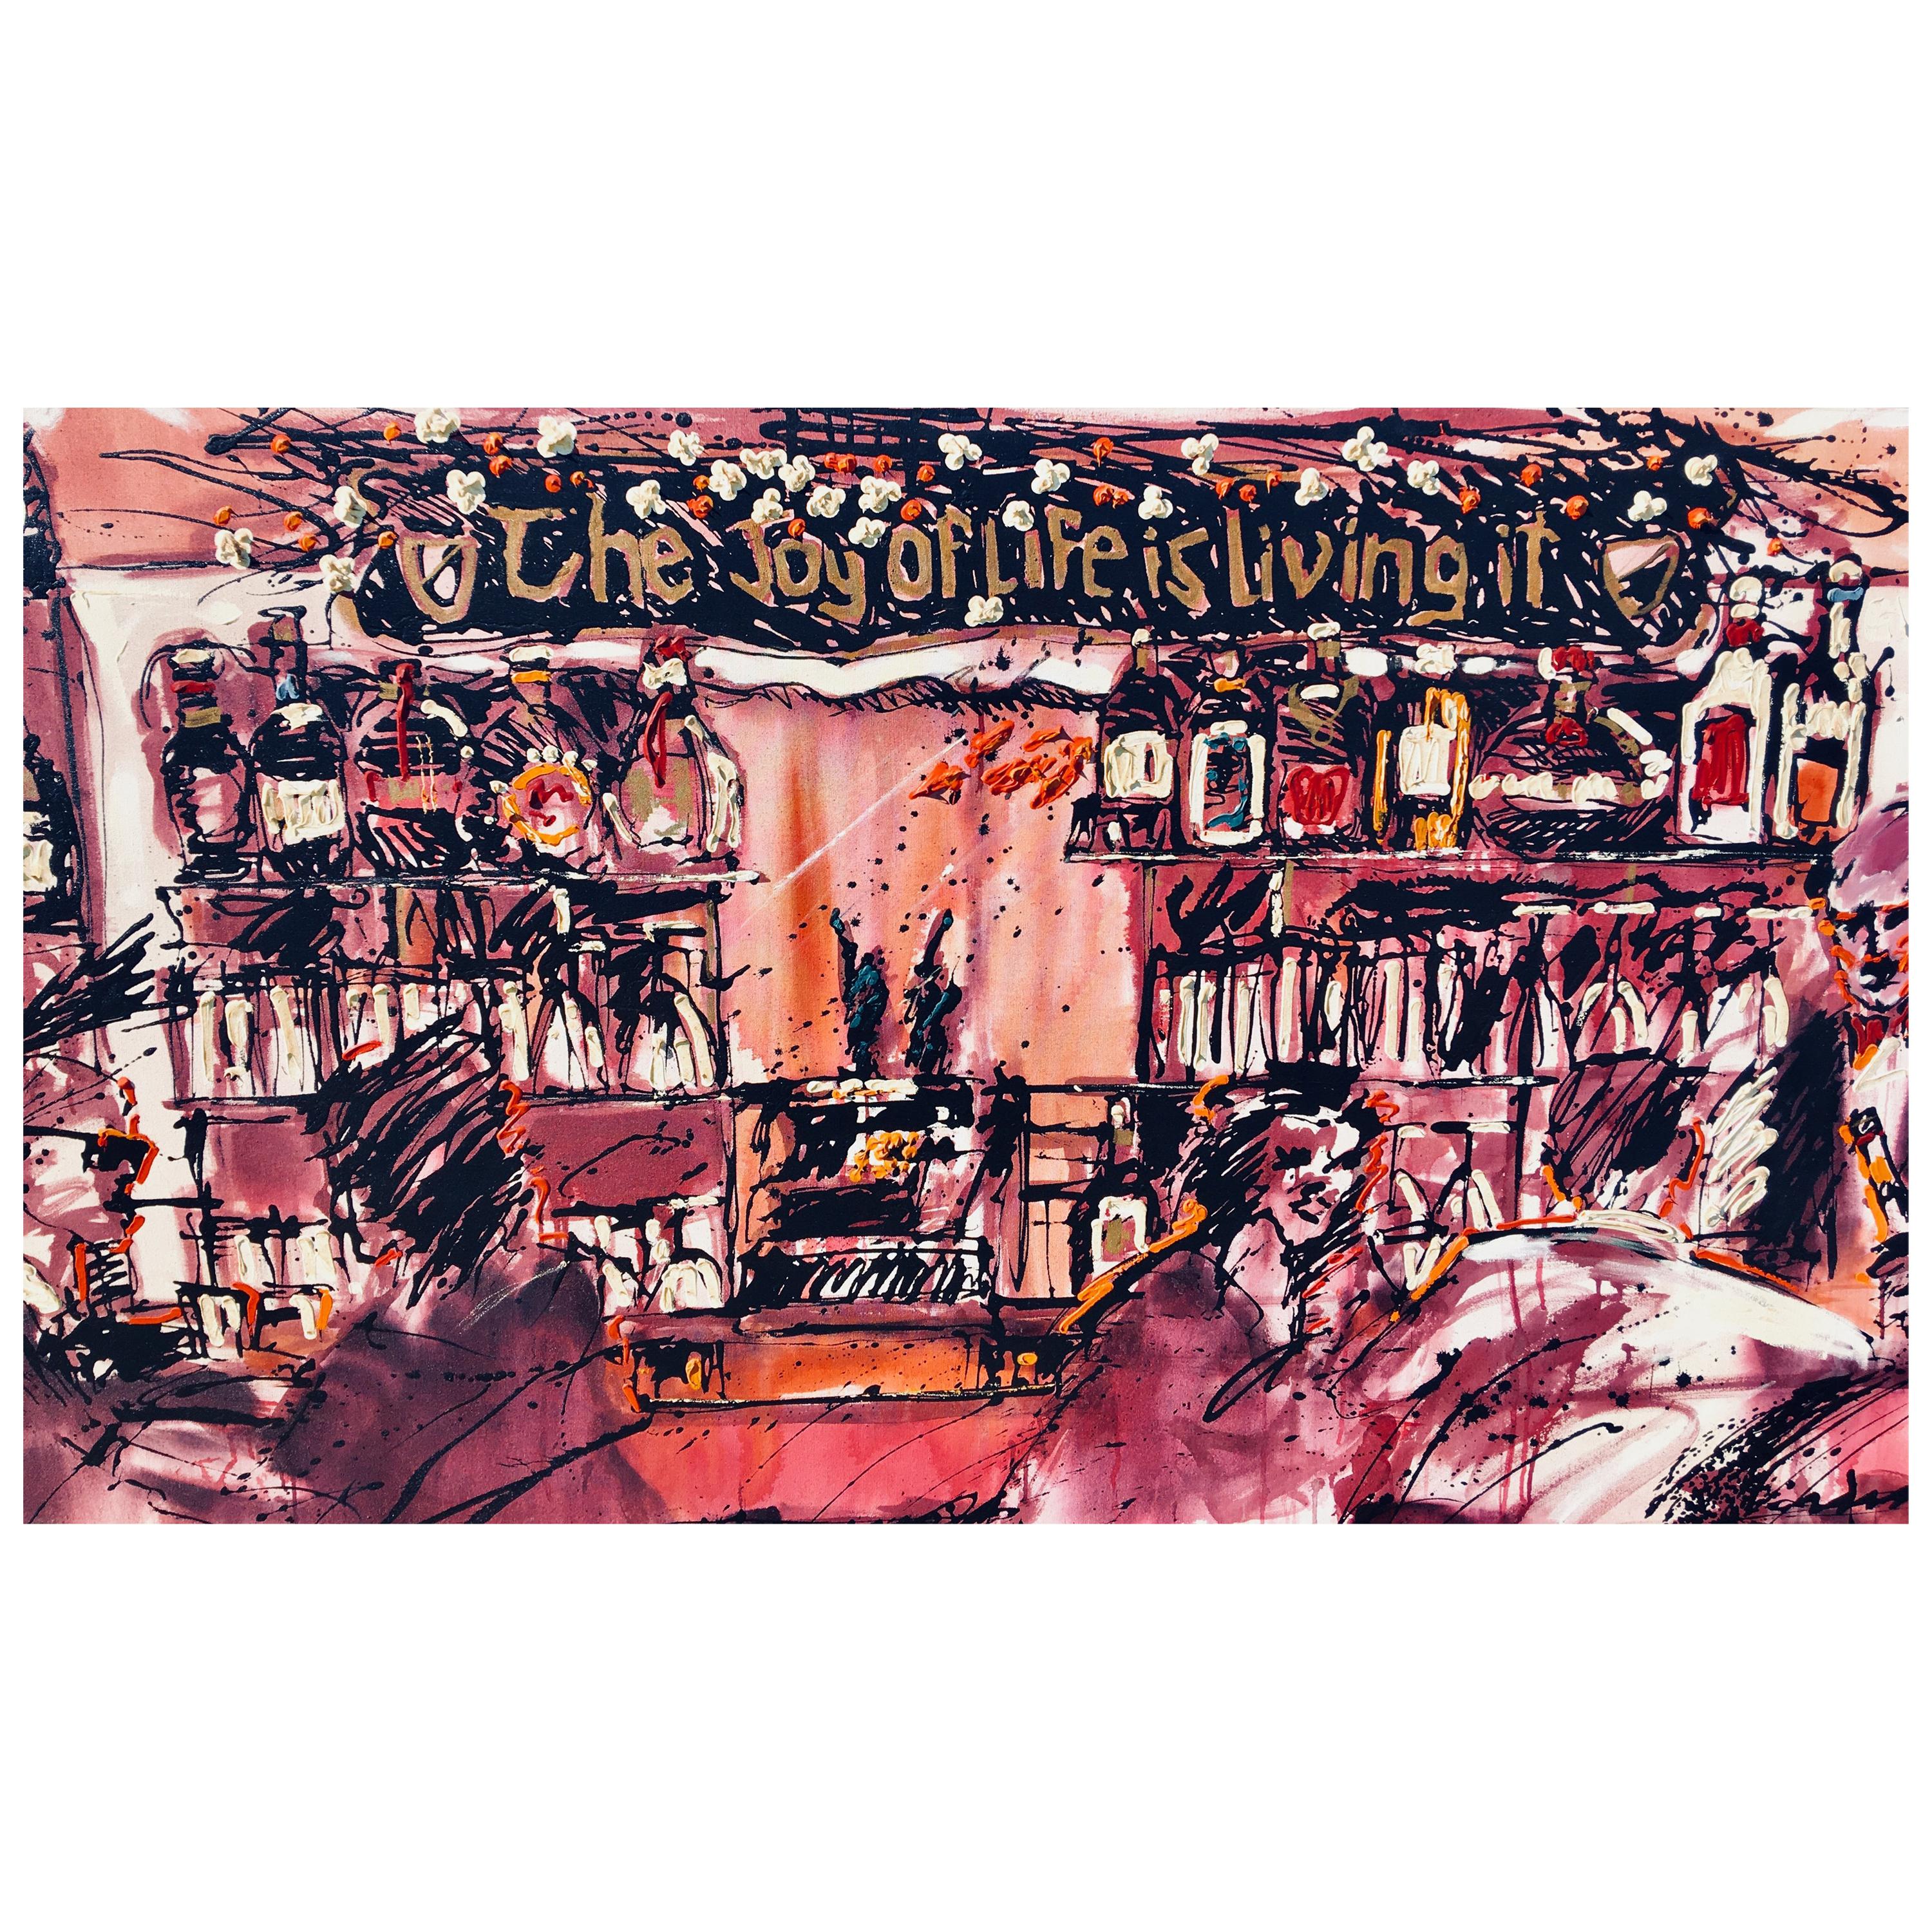 This giant sized, monumental, (unframed - no frame required) contemporary, original acrylic on canvas painting is an abstract rendering of the bar area of The Arches, an iconic Newport Beach, California watering hole and restaurant which was